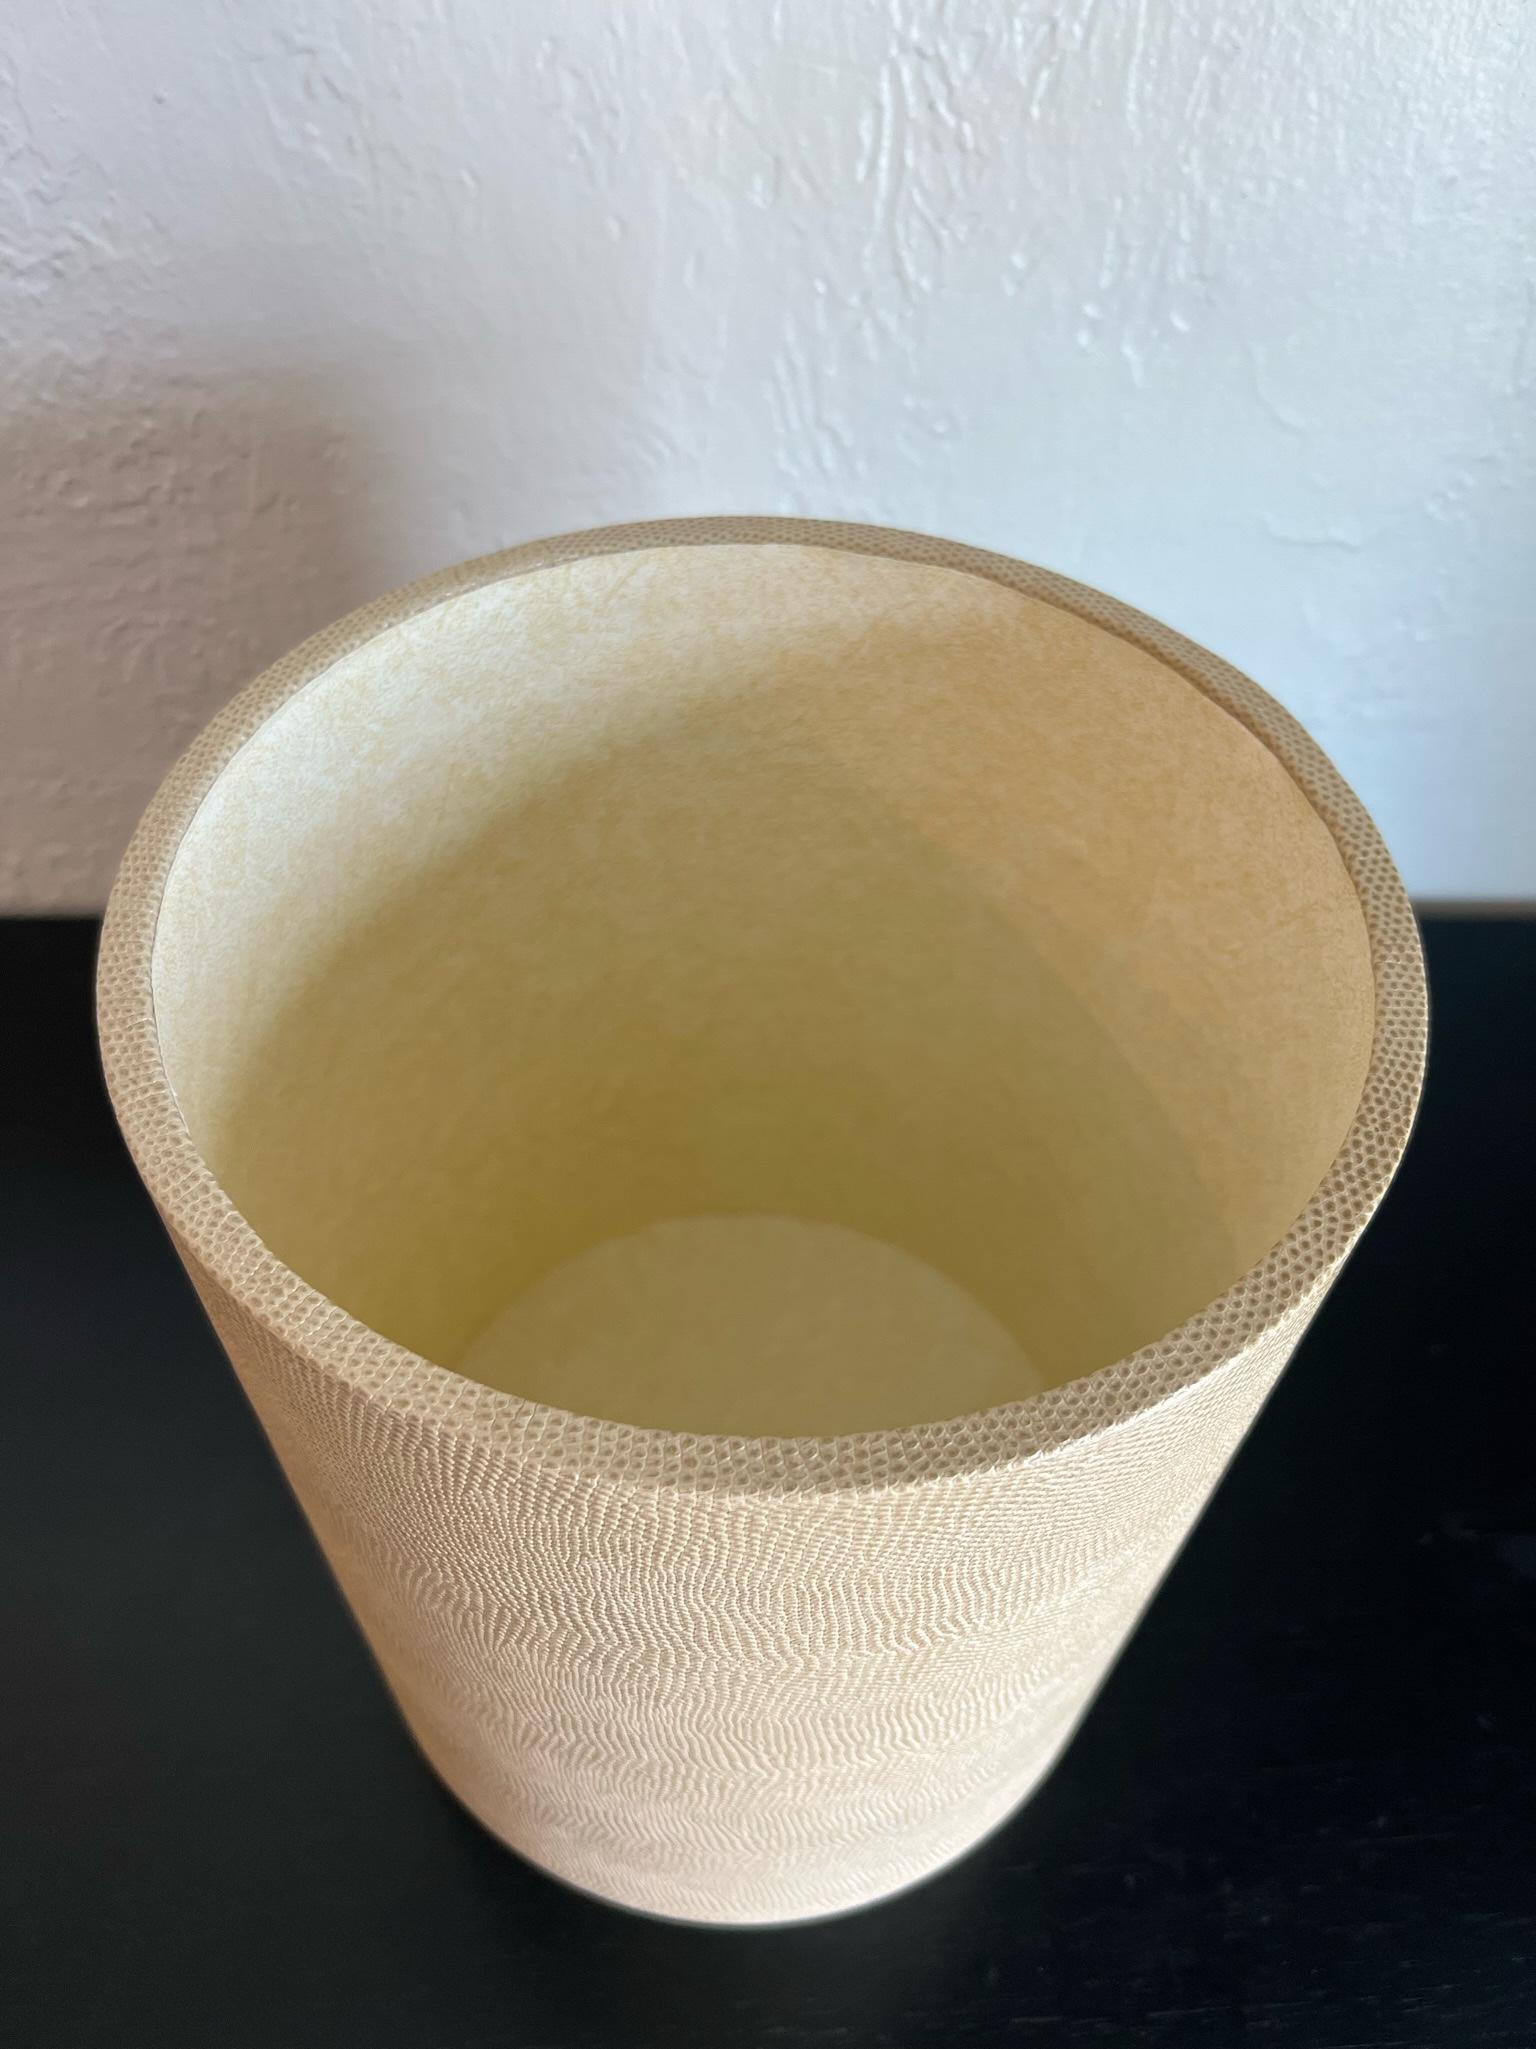 Karl Springer style faux lizard skin waste basket. Embossed faux lizard skin in a neutral beige tone. 

Would work well in a variety of interiors such as modern, mid century modern, Hollywood regency, etc. Piece blends seamlessly with other